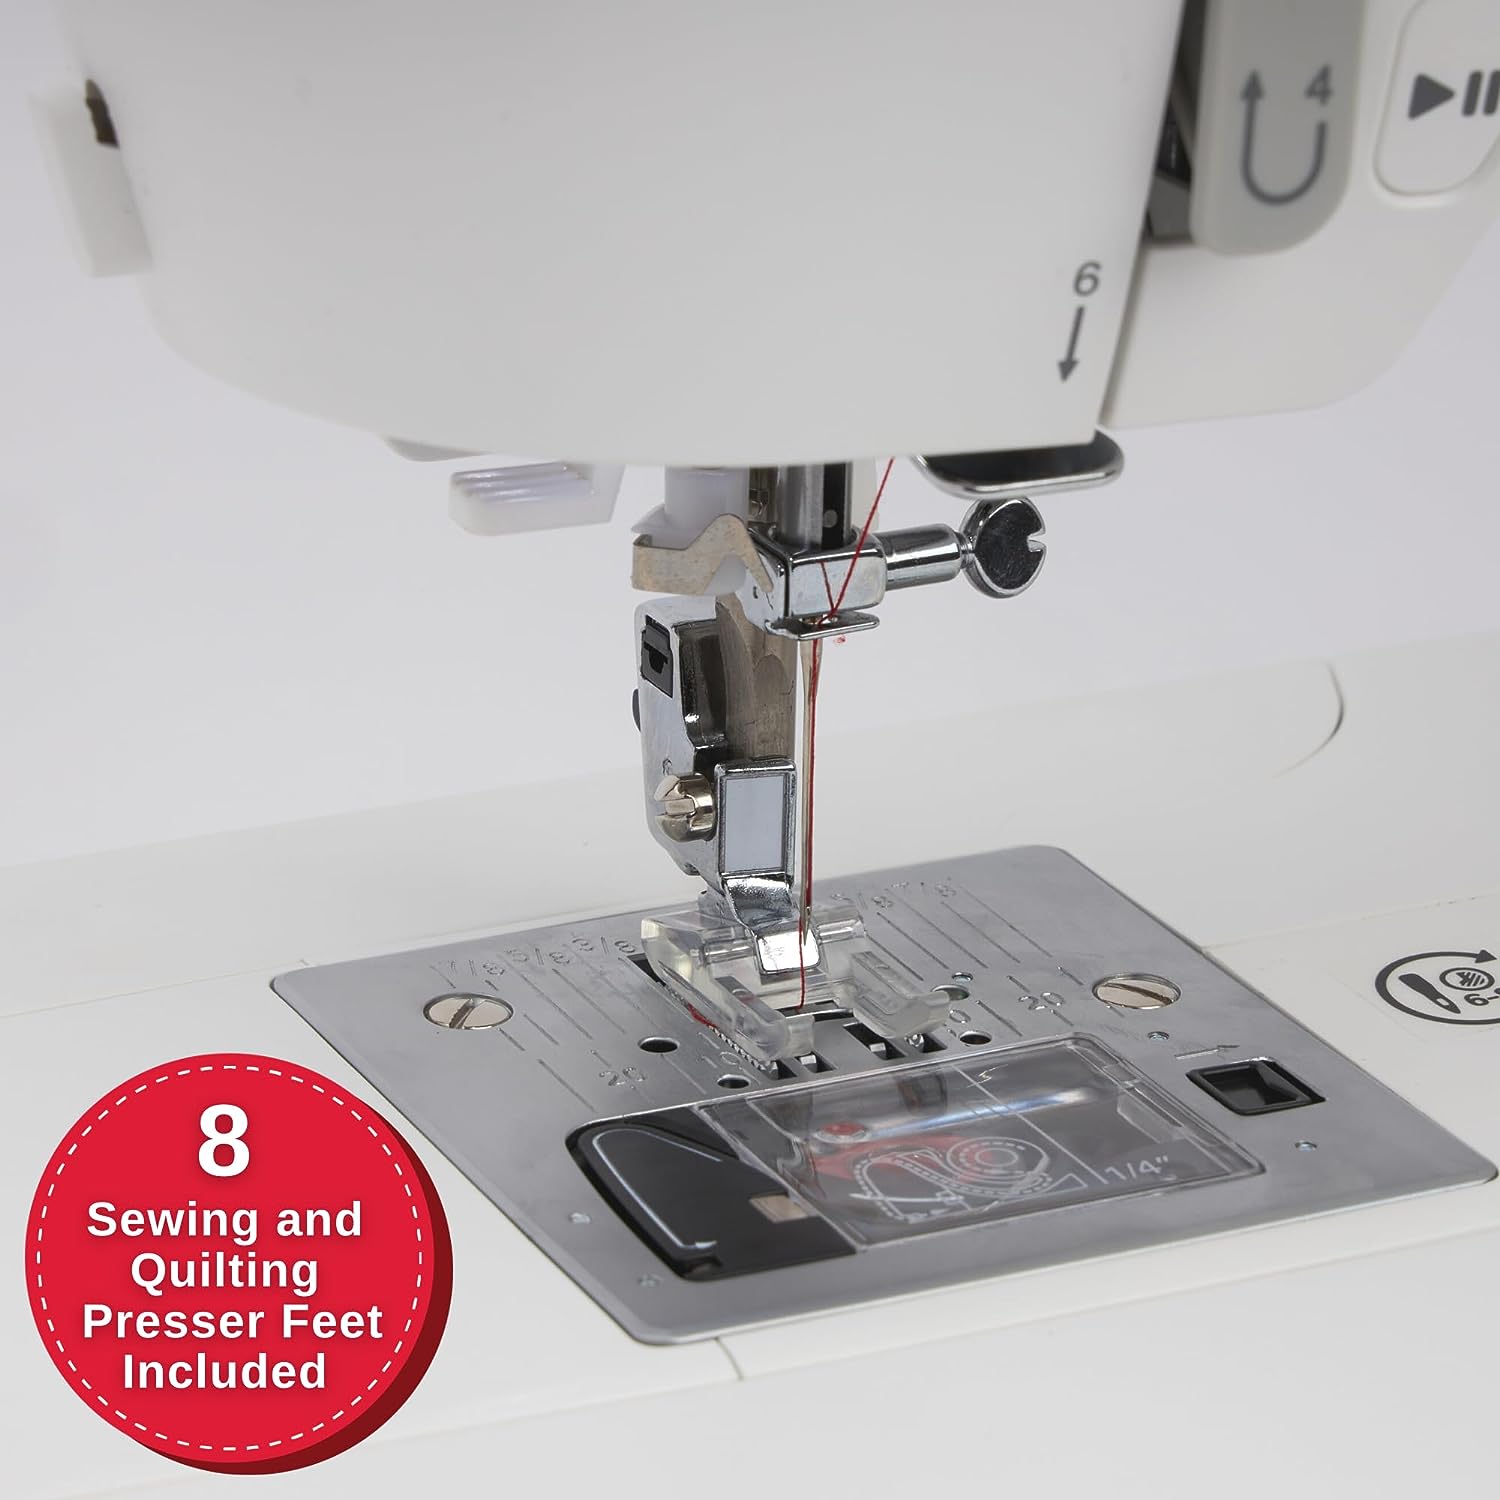 SINGER C7250 Sewing Machine Review